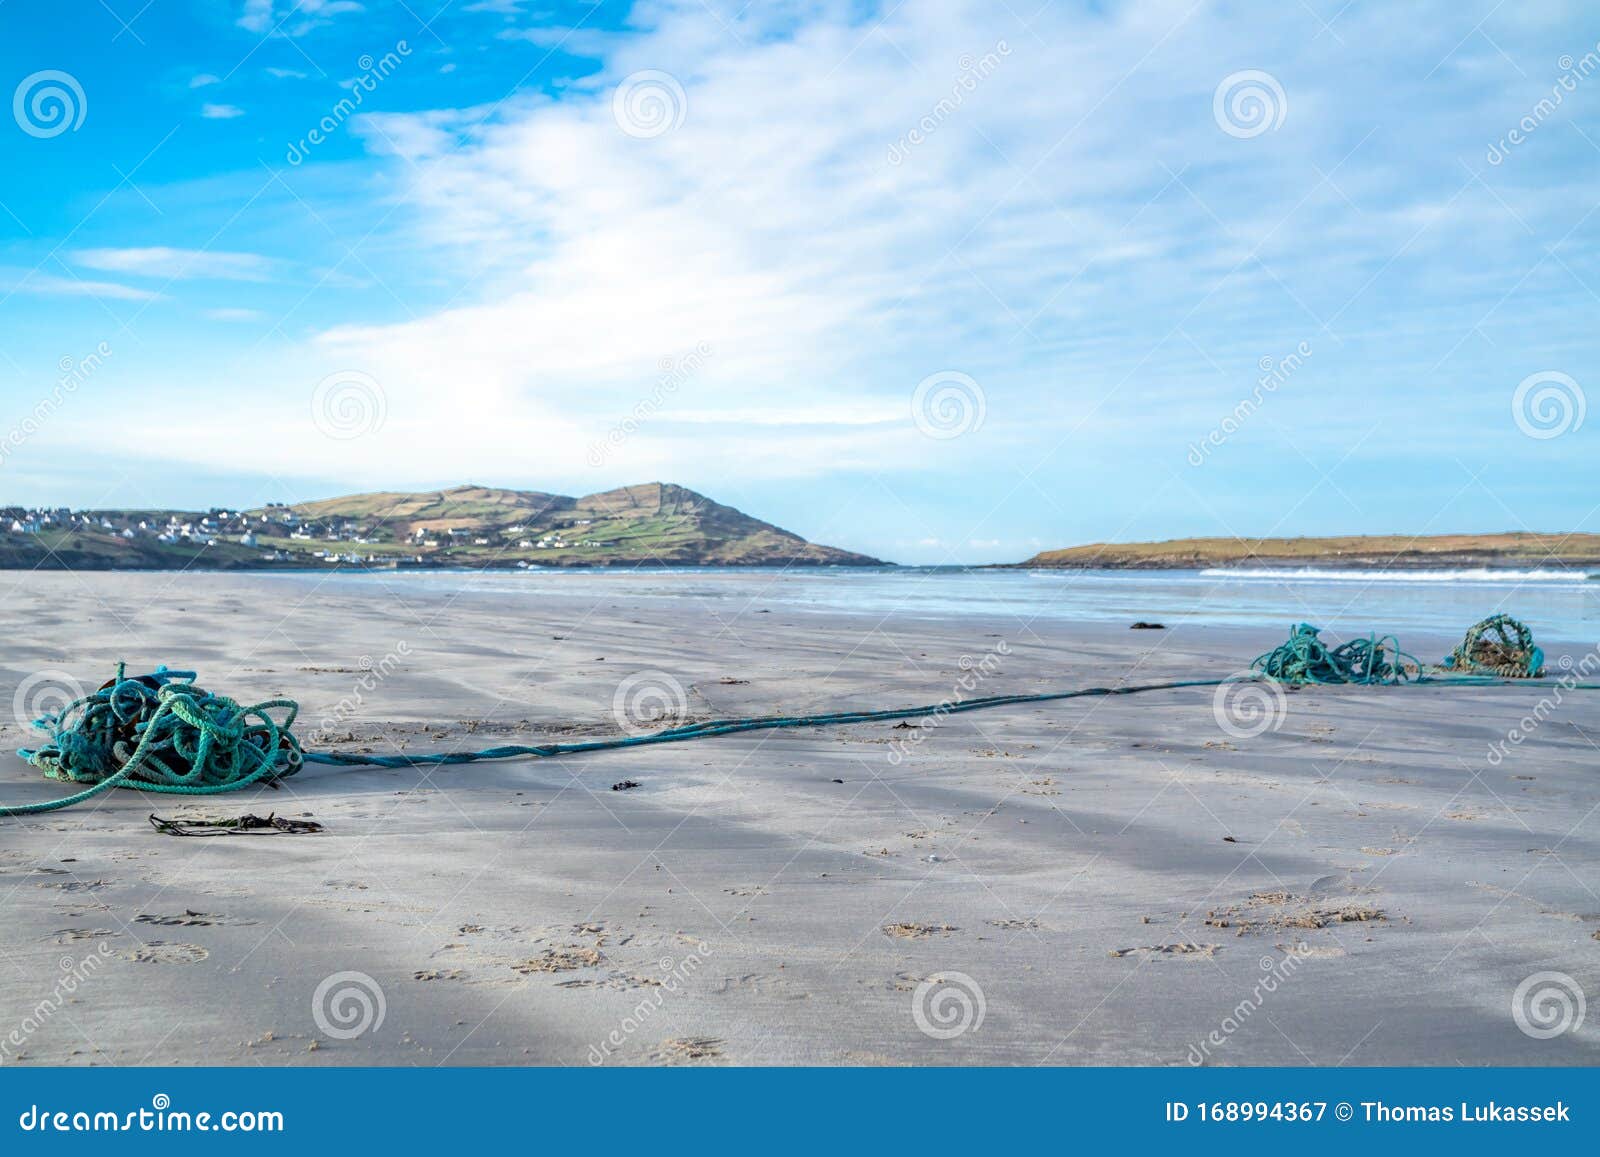 A Buoy and Crab Trap Washed Up on Portnoo Beach after a Strong